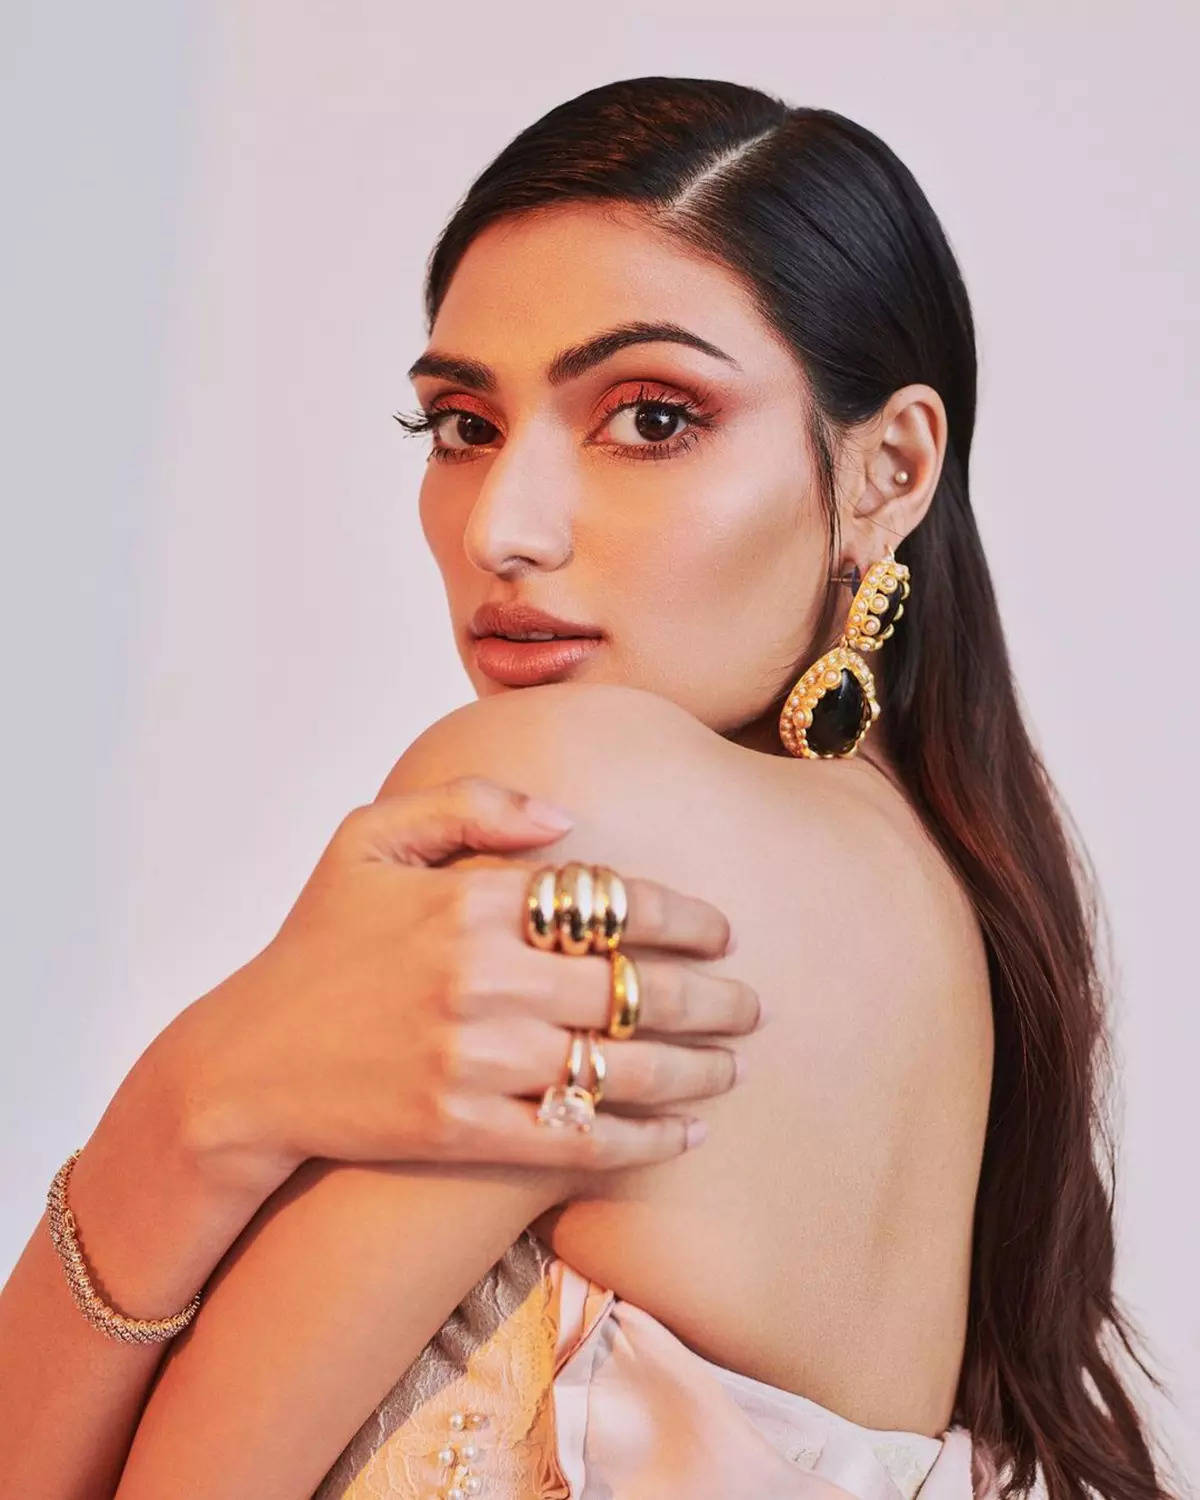 Suneil Shetty's daughter Athiya Shetty turns up the heat with her glamorous pictures